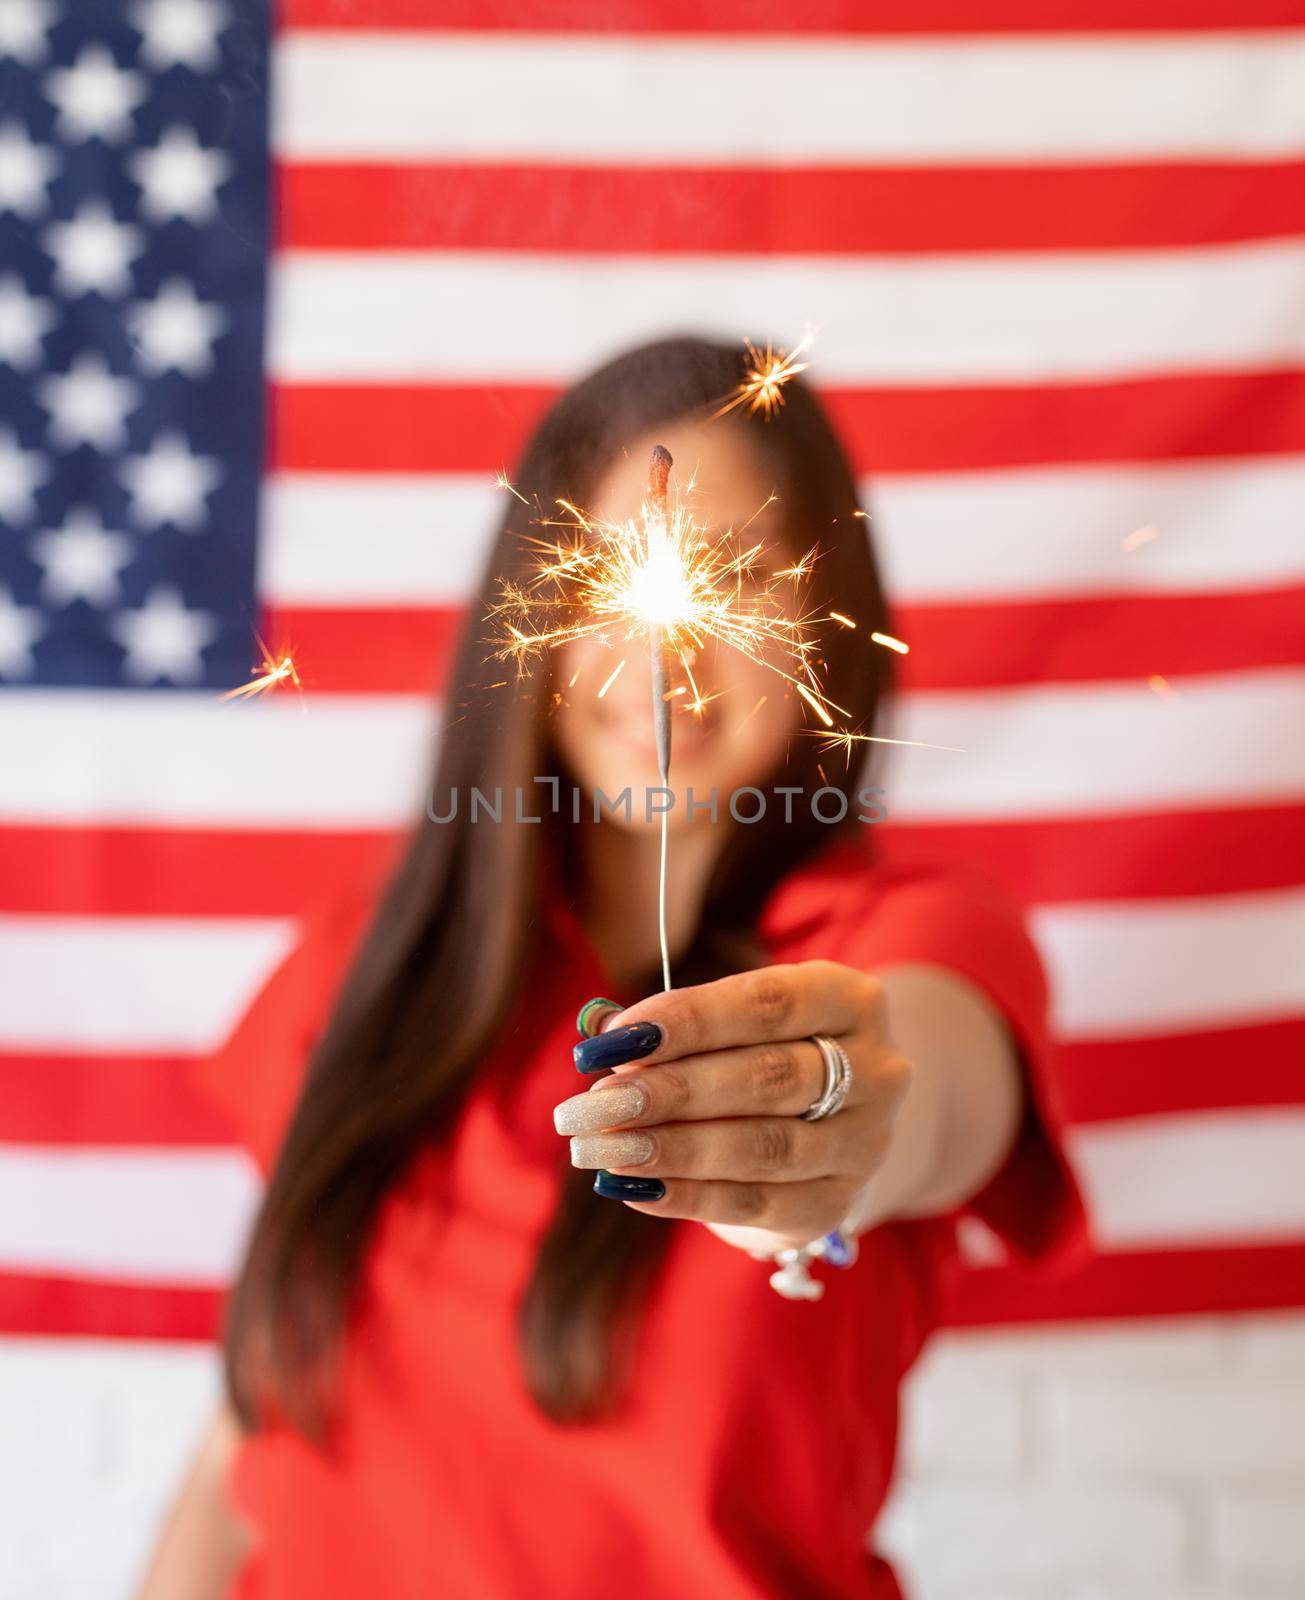 Independence day of the USA. Happy July 4th. Sparkling Bengal fire in caucasian woman hand. Beautiful woman holding a sparkler on US flag background